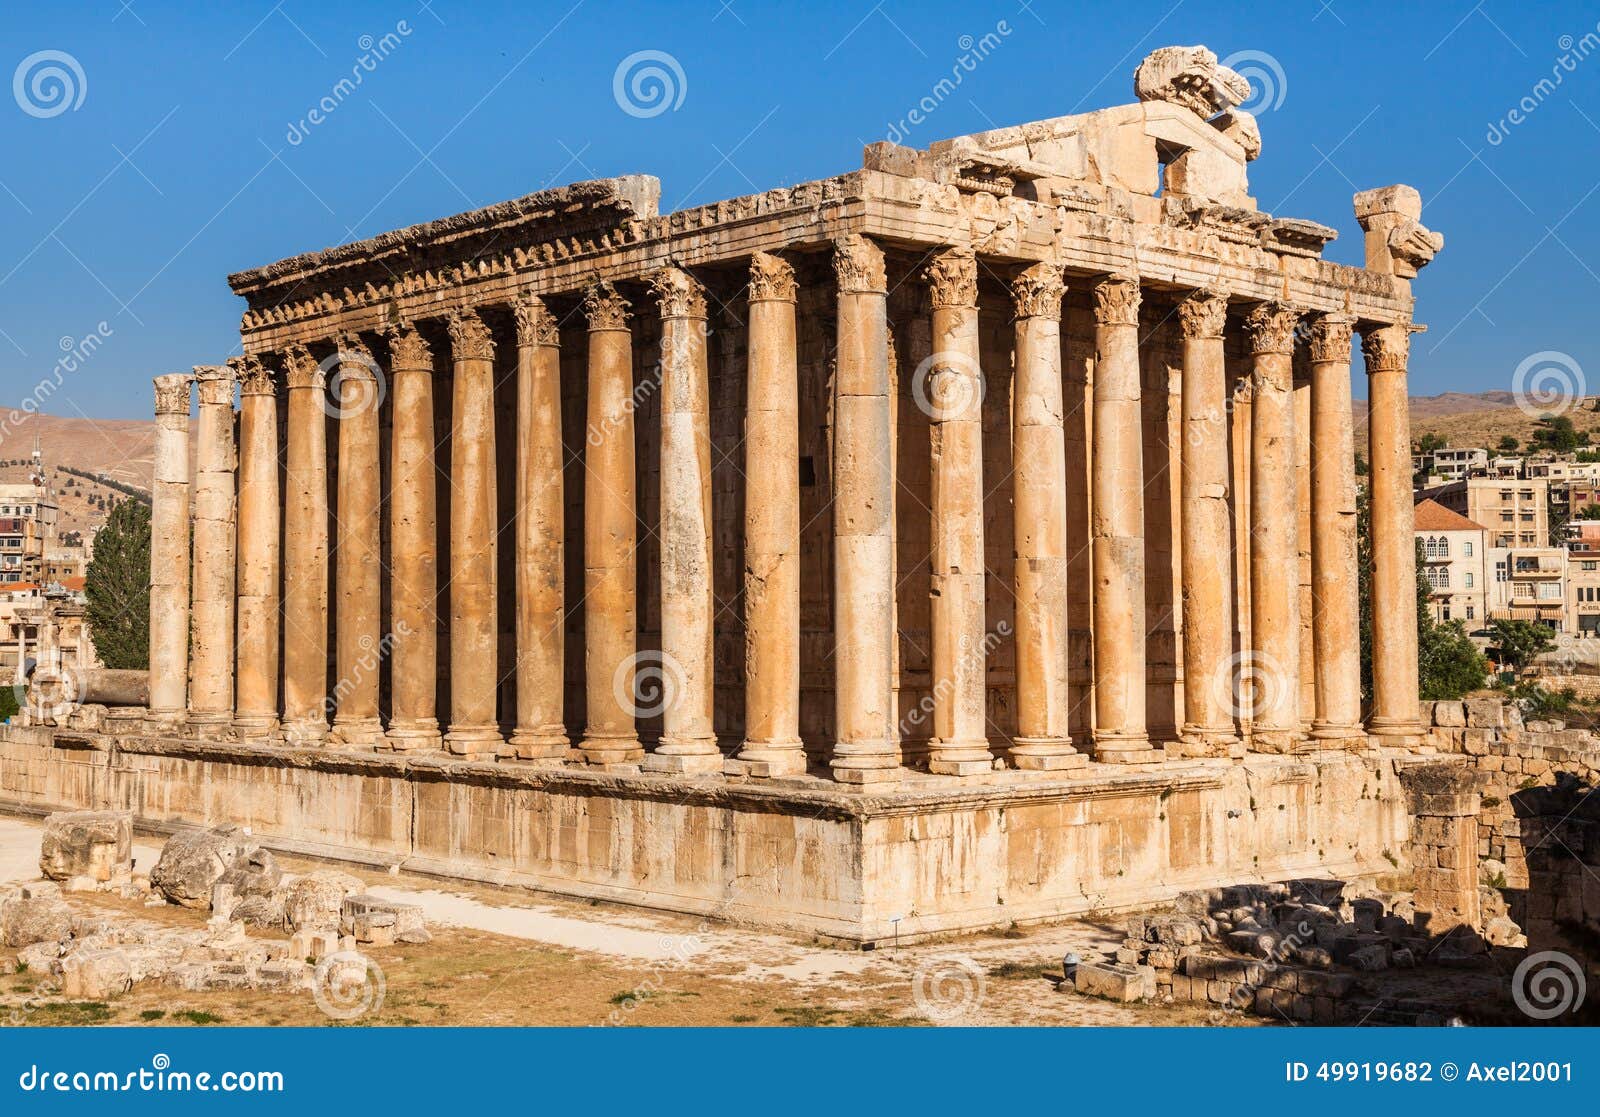 temple of bacchus in baalbek ancient roman ruins, beqaa valley of lebanon